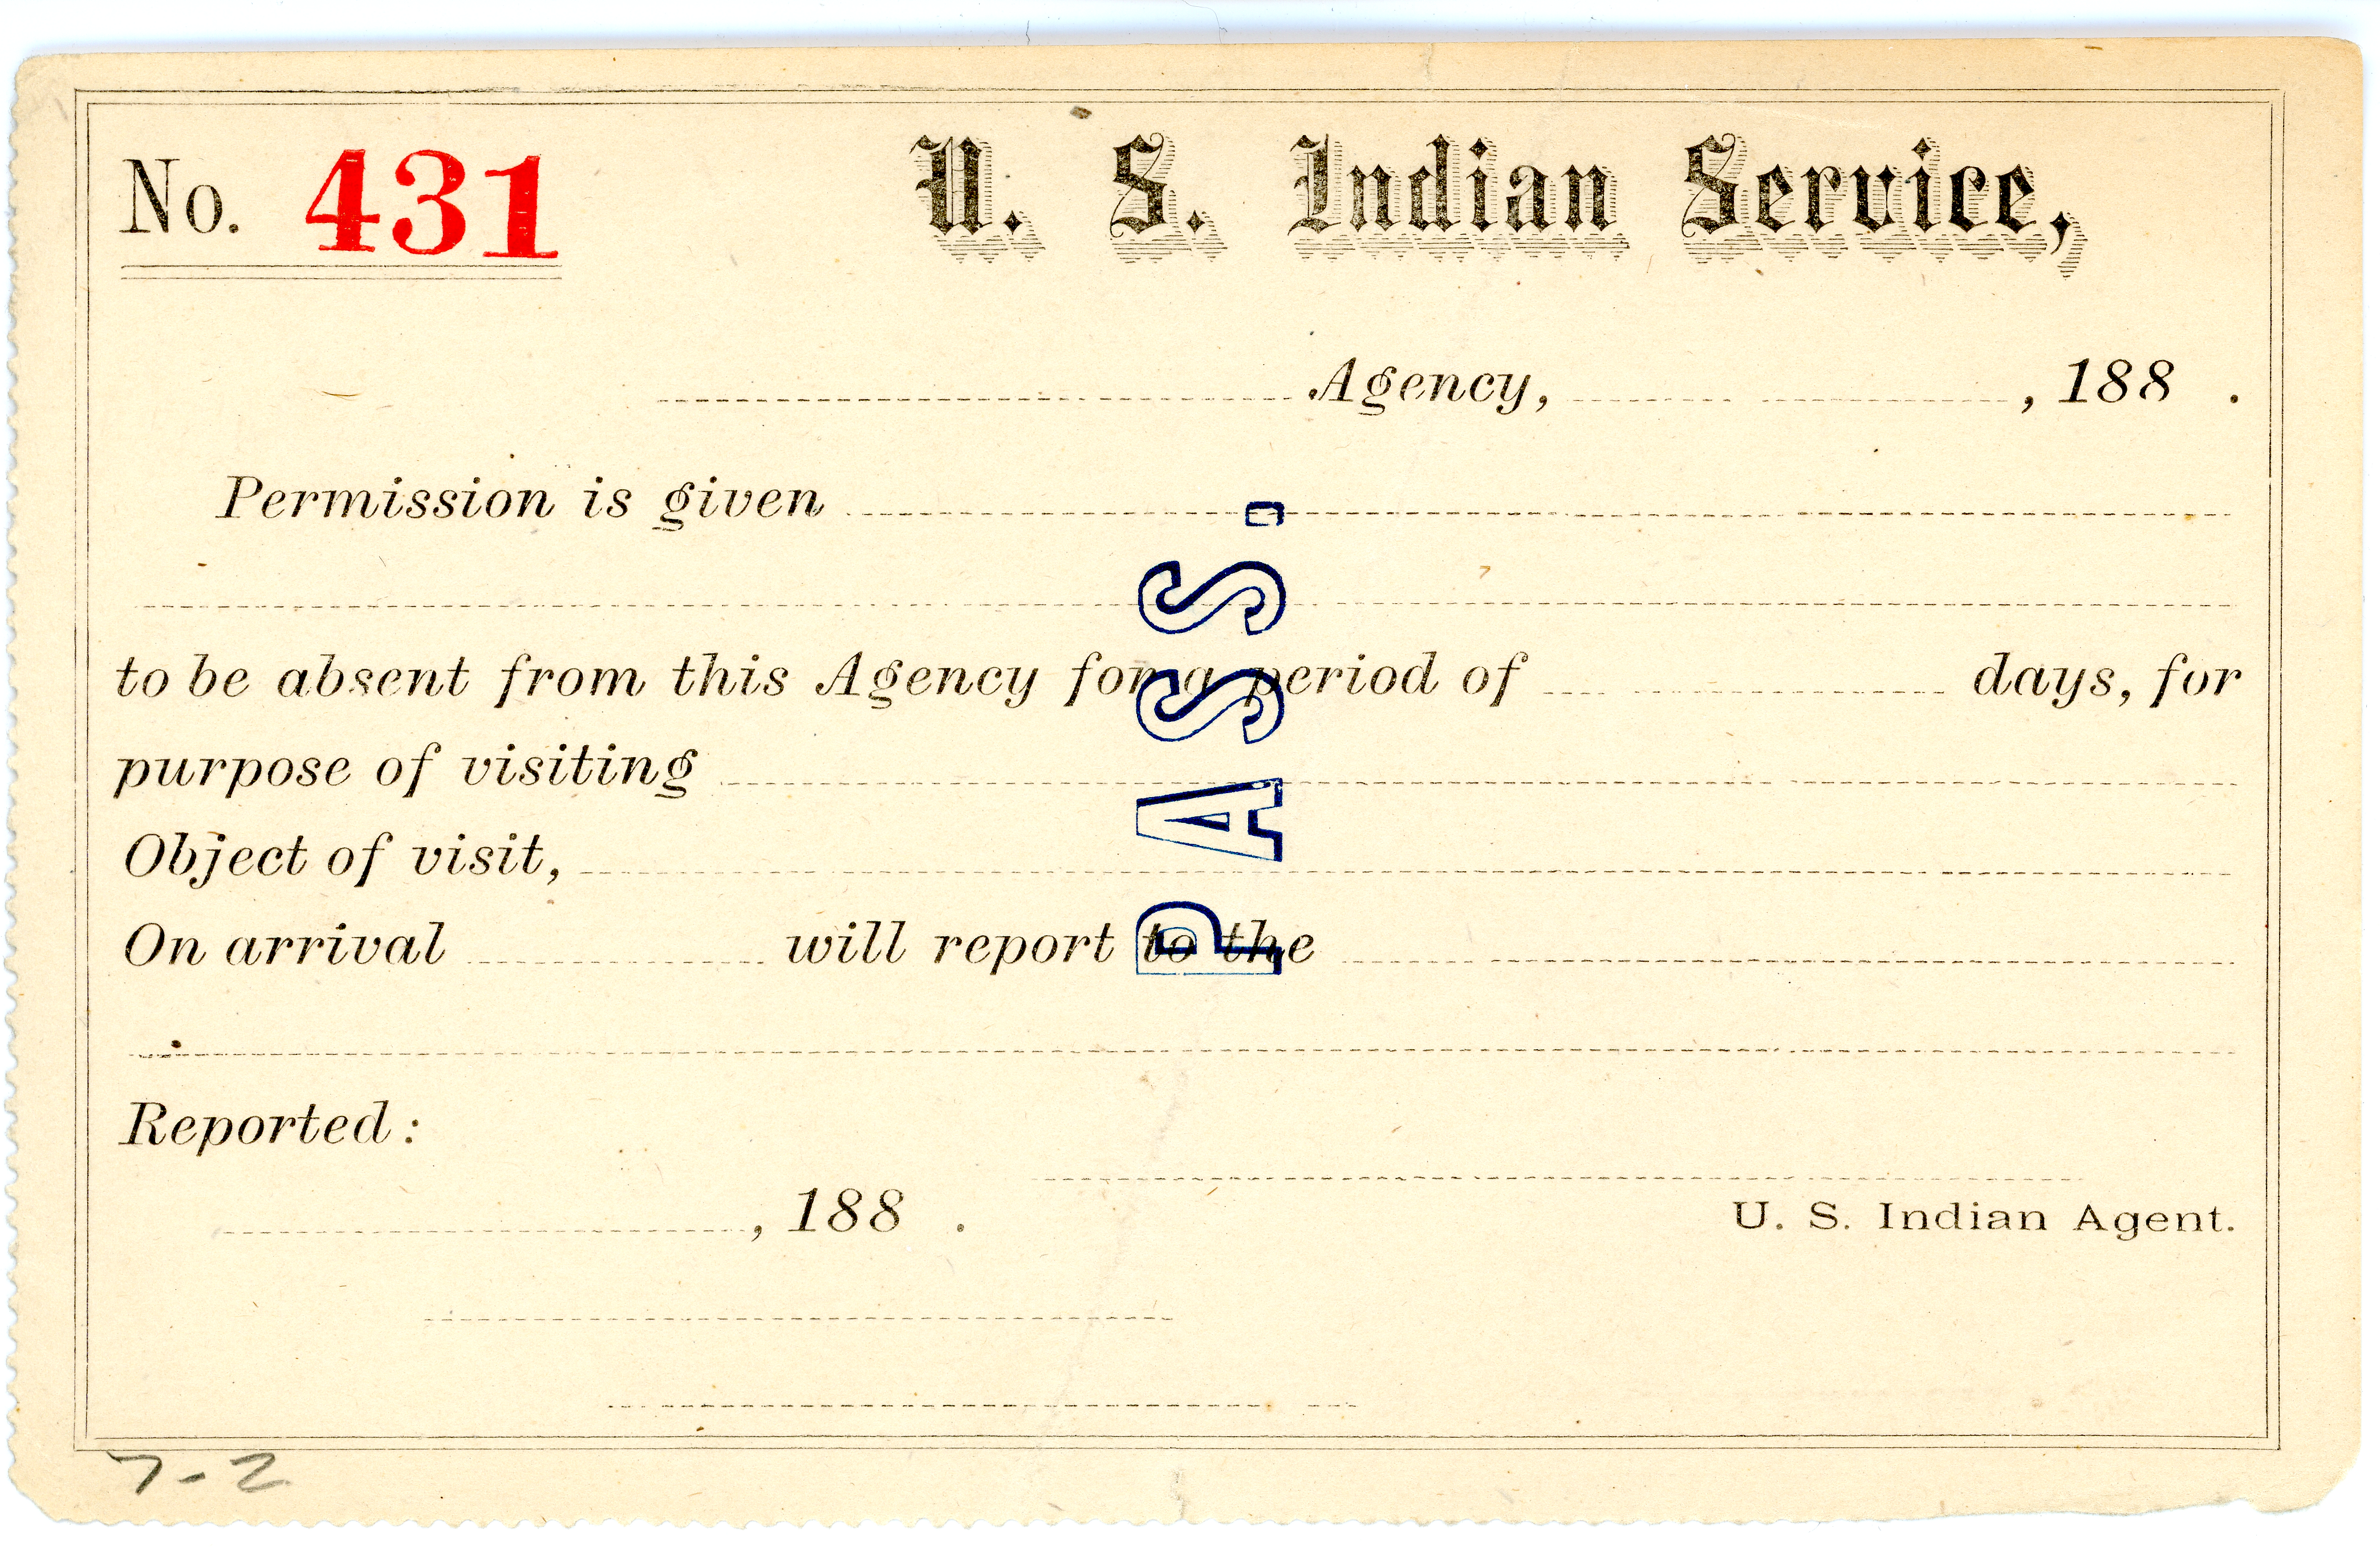 An issuance pass reading: "U.S. Indian Service. Permission is given [blank] to be absent from this Agency for a period of [blank] days, for purpose of visiting [blank.] On arrival, [blank] will report to the [blank]. Reported: [date], [name], U.S. Indian Agent."